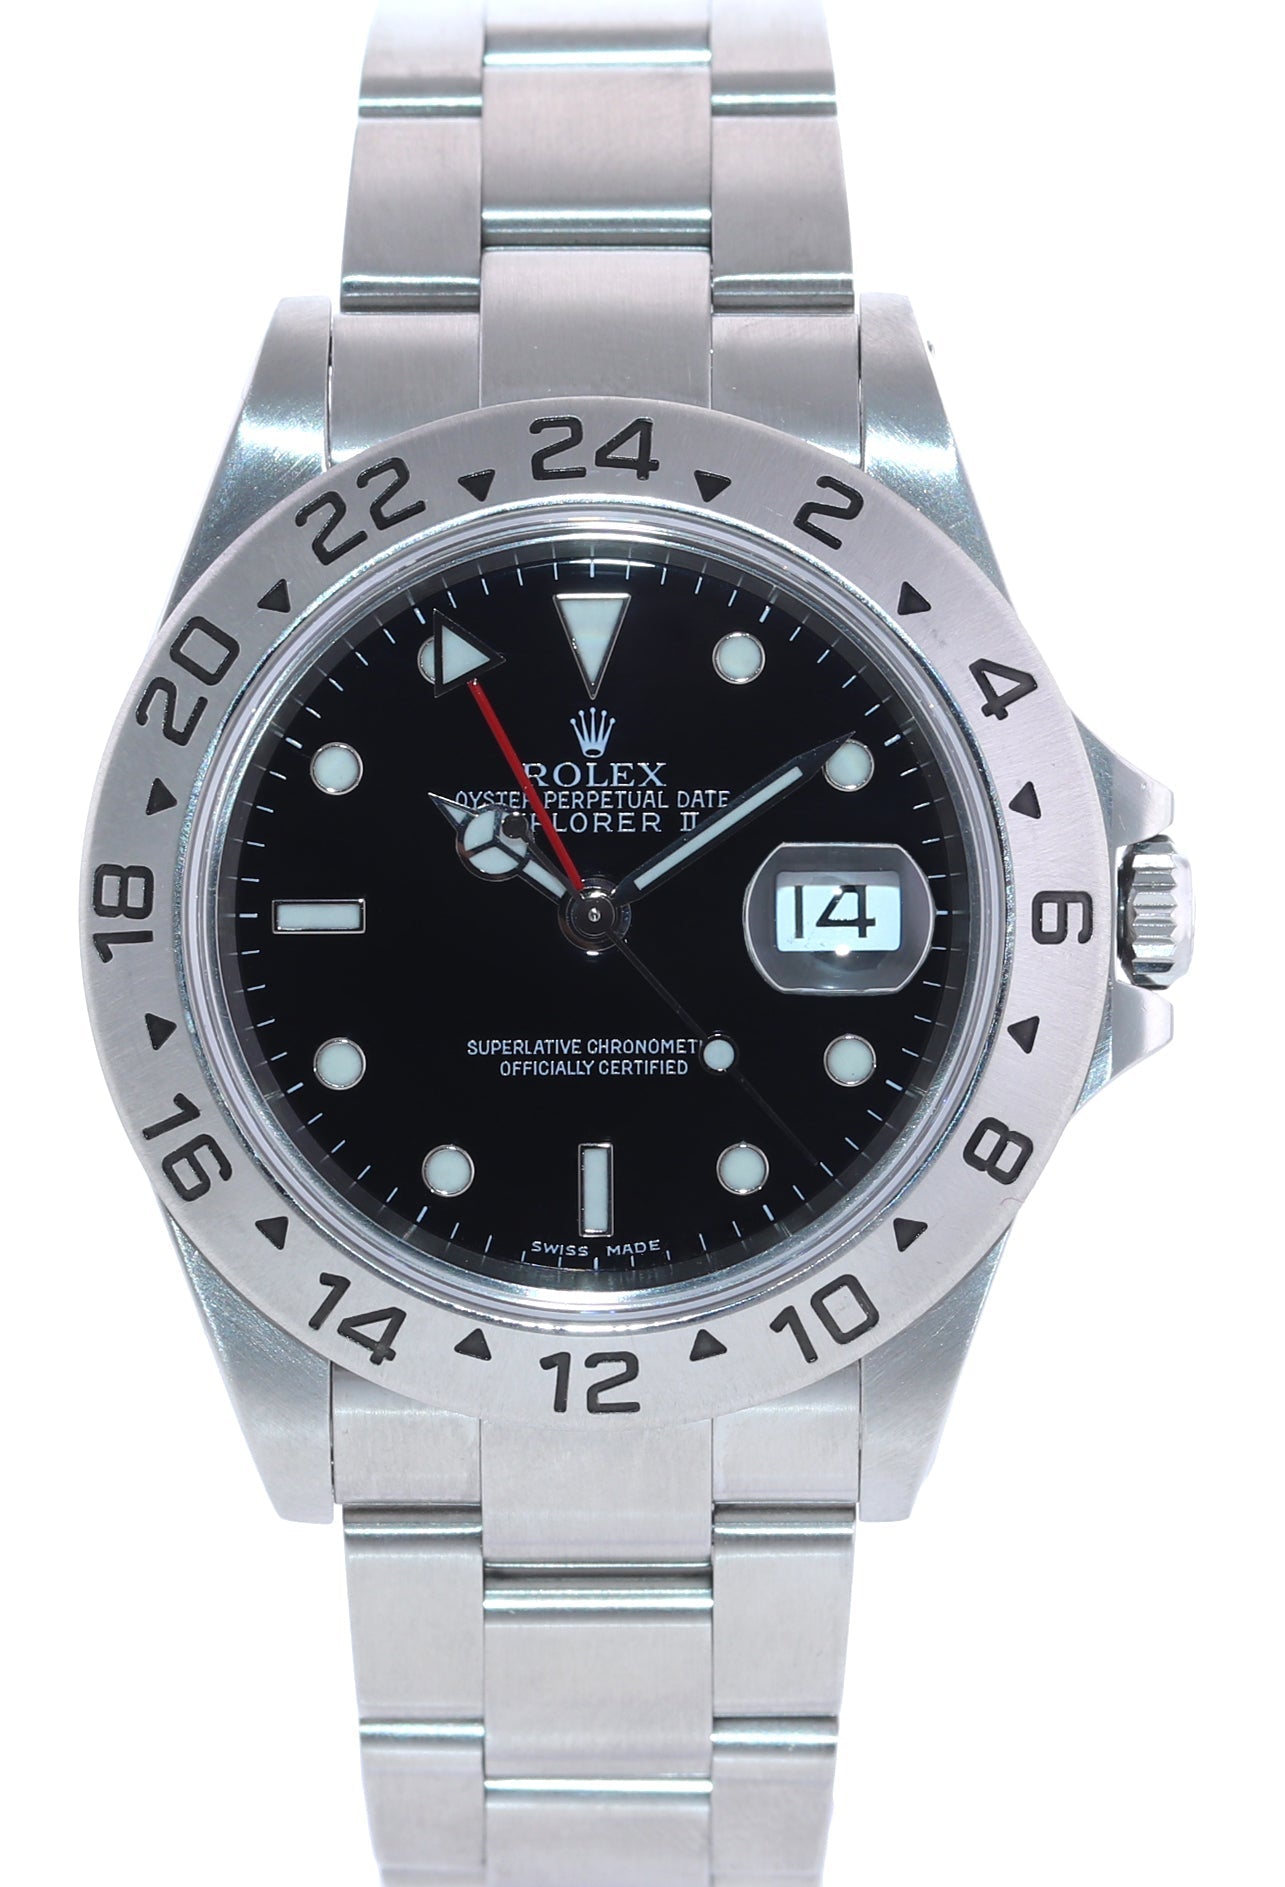 2002 Papers Rolex Explorer II 16570 Stainless Steel Black Dial GMT 40mm Watch